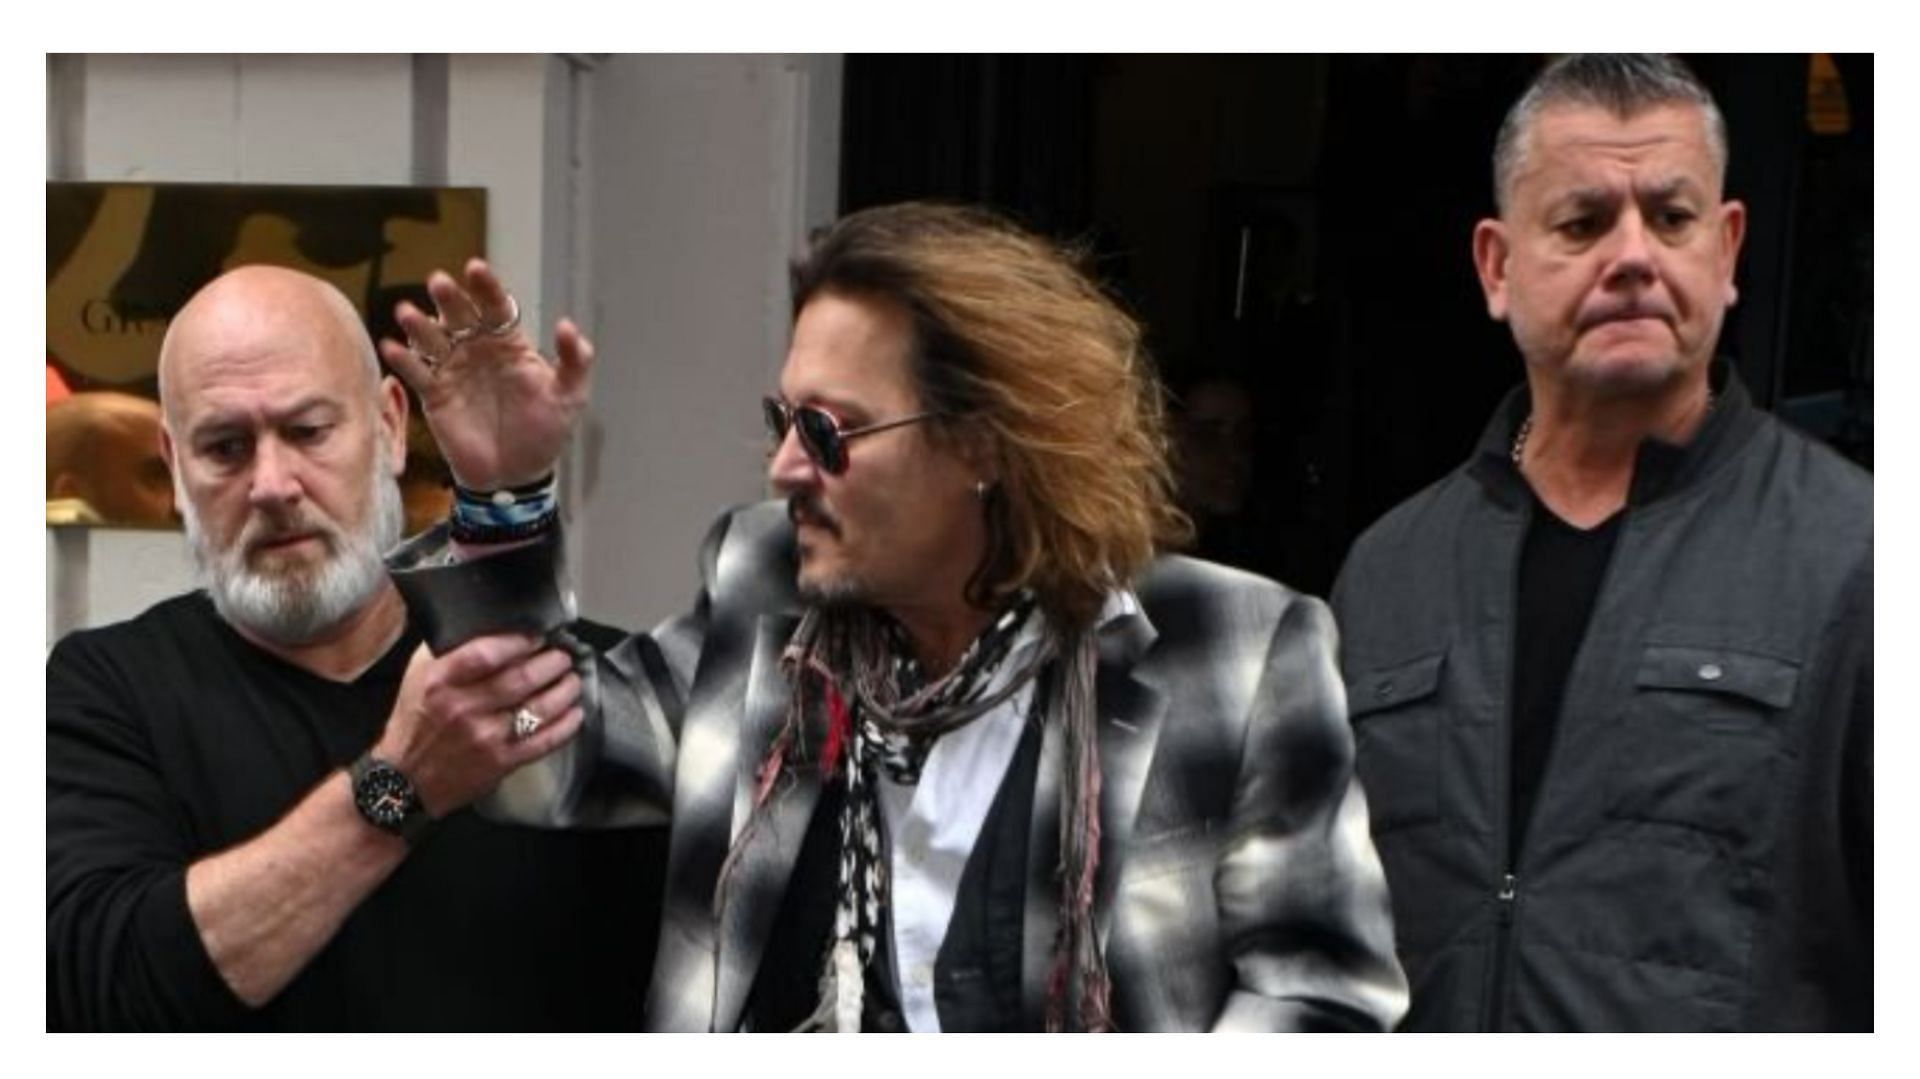 Johnny Depp being accompanied by his security team (Image via MEGA/Getty Images)